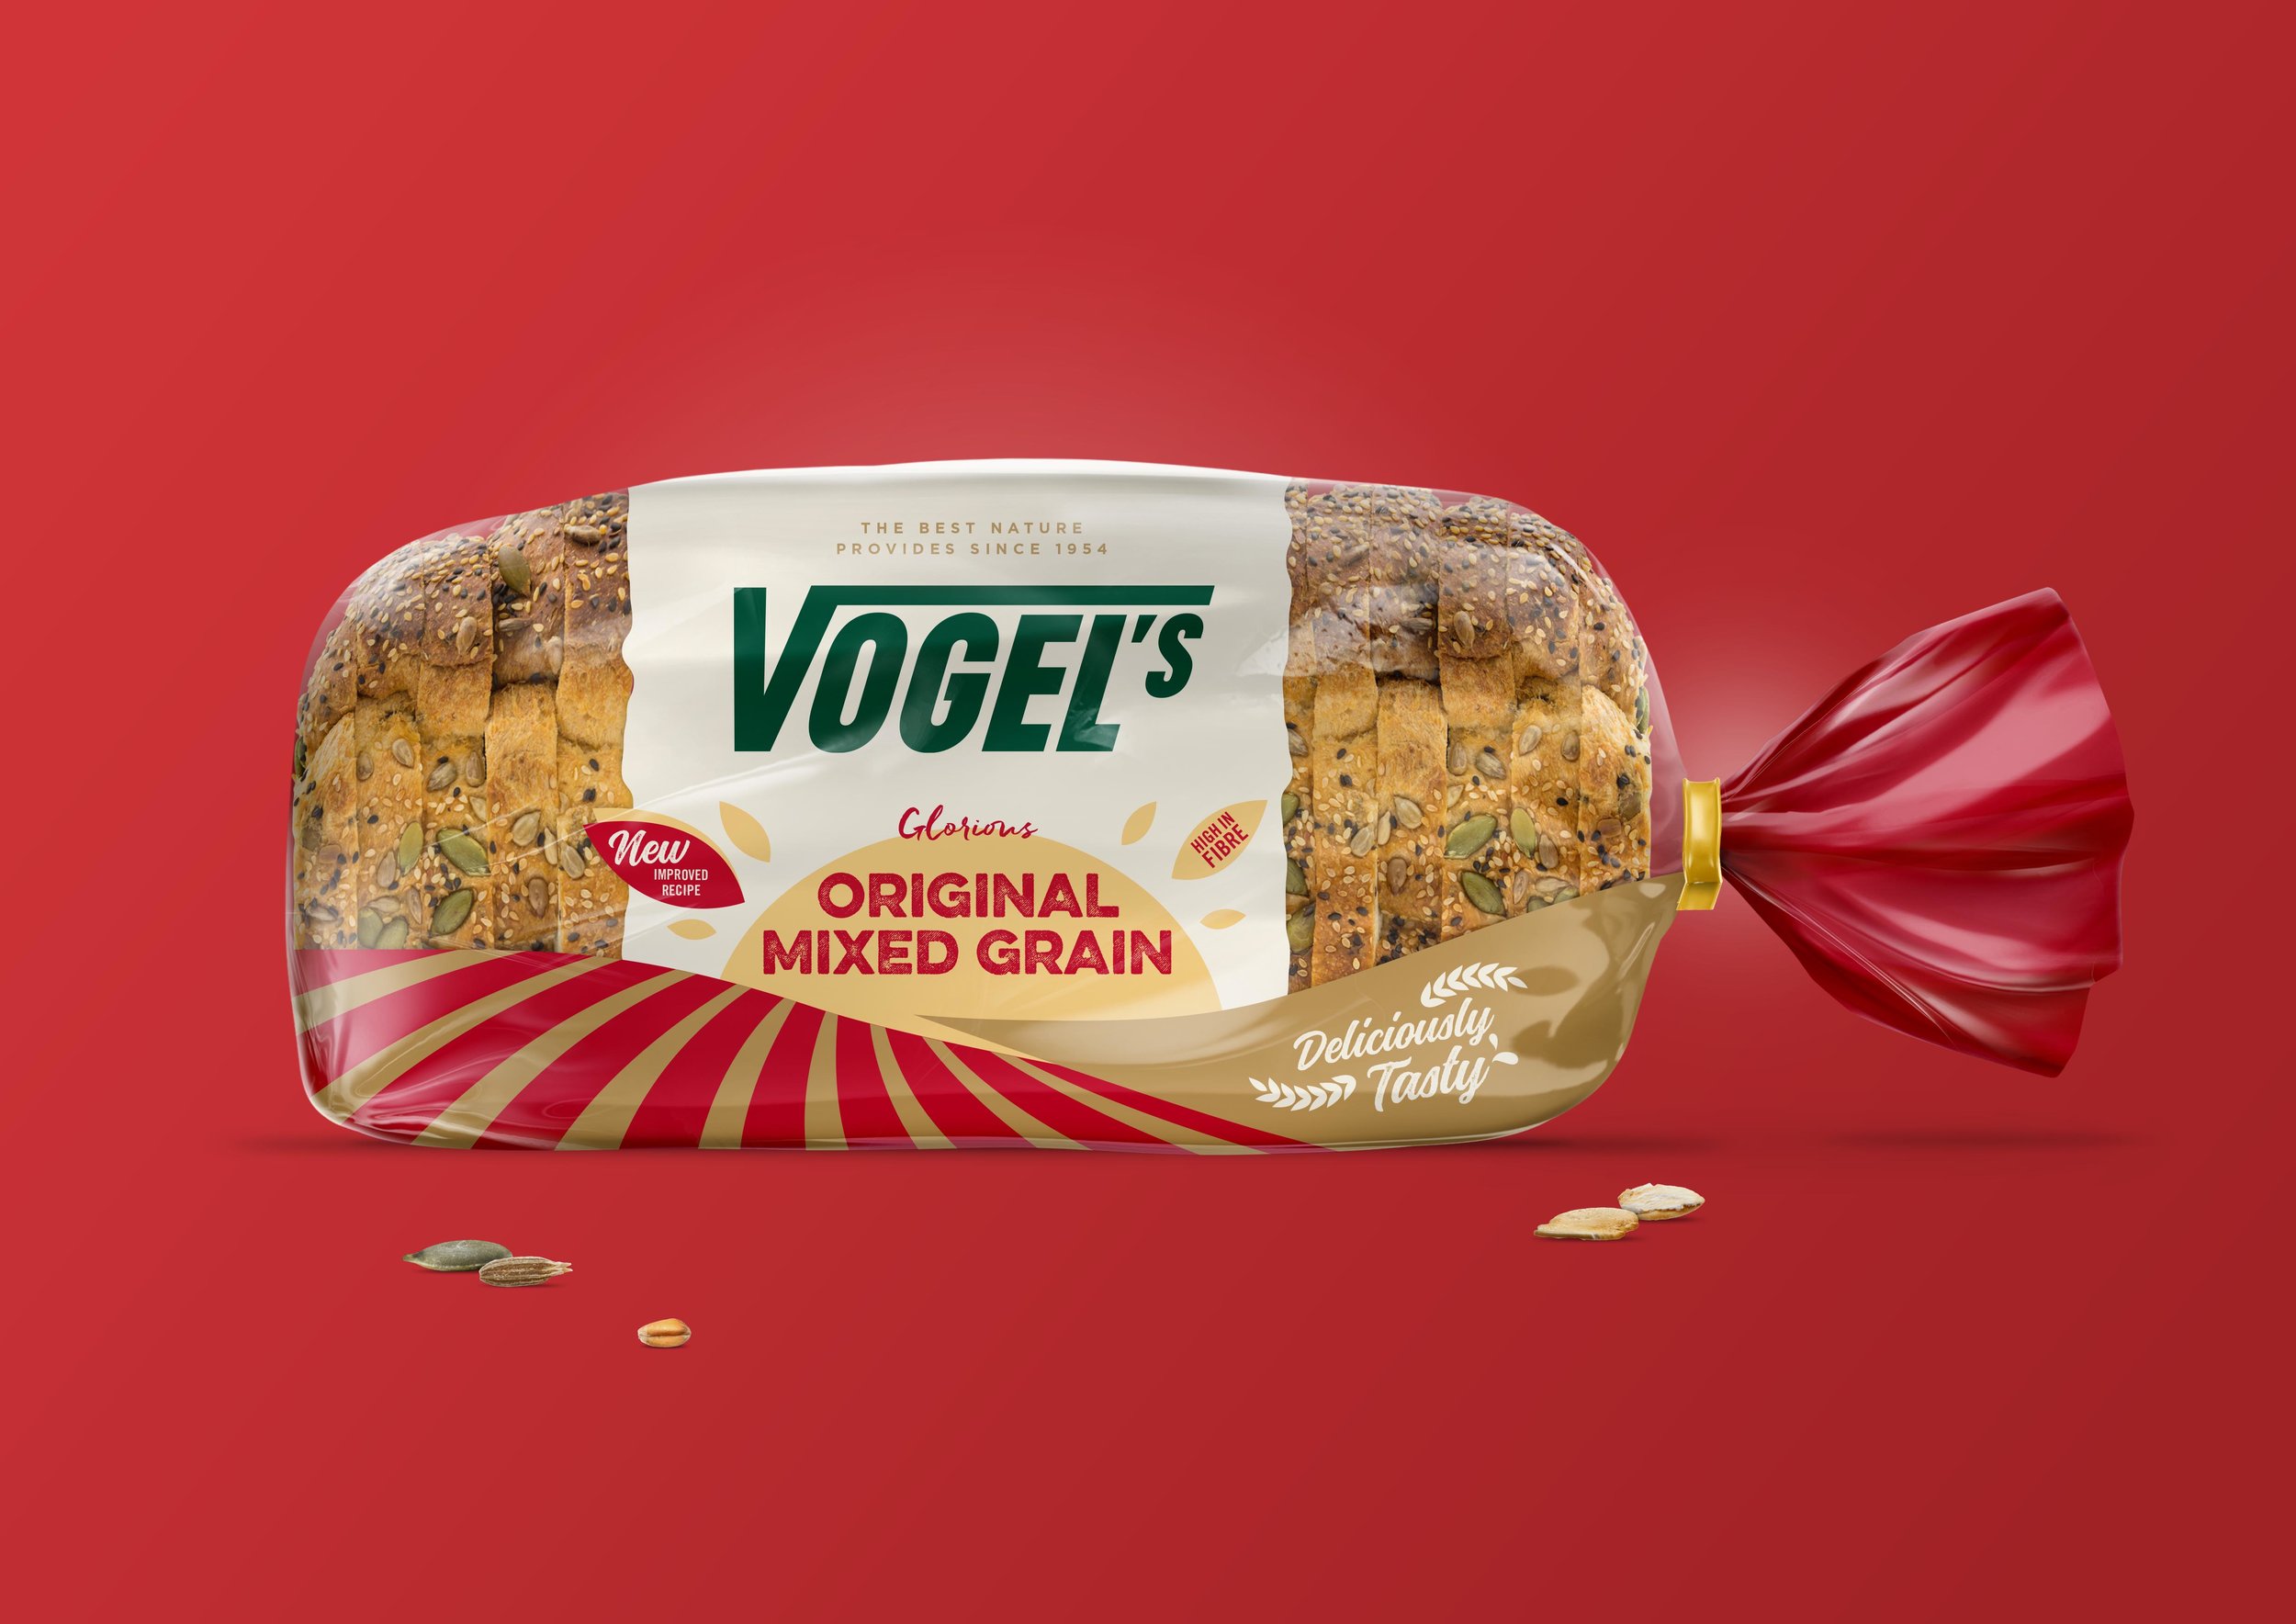 Vogel’s Bread Packaging Design, At One with Nature